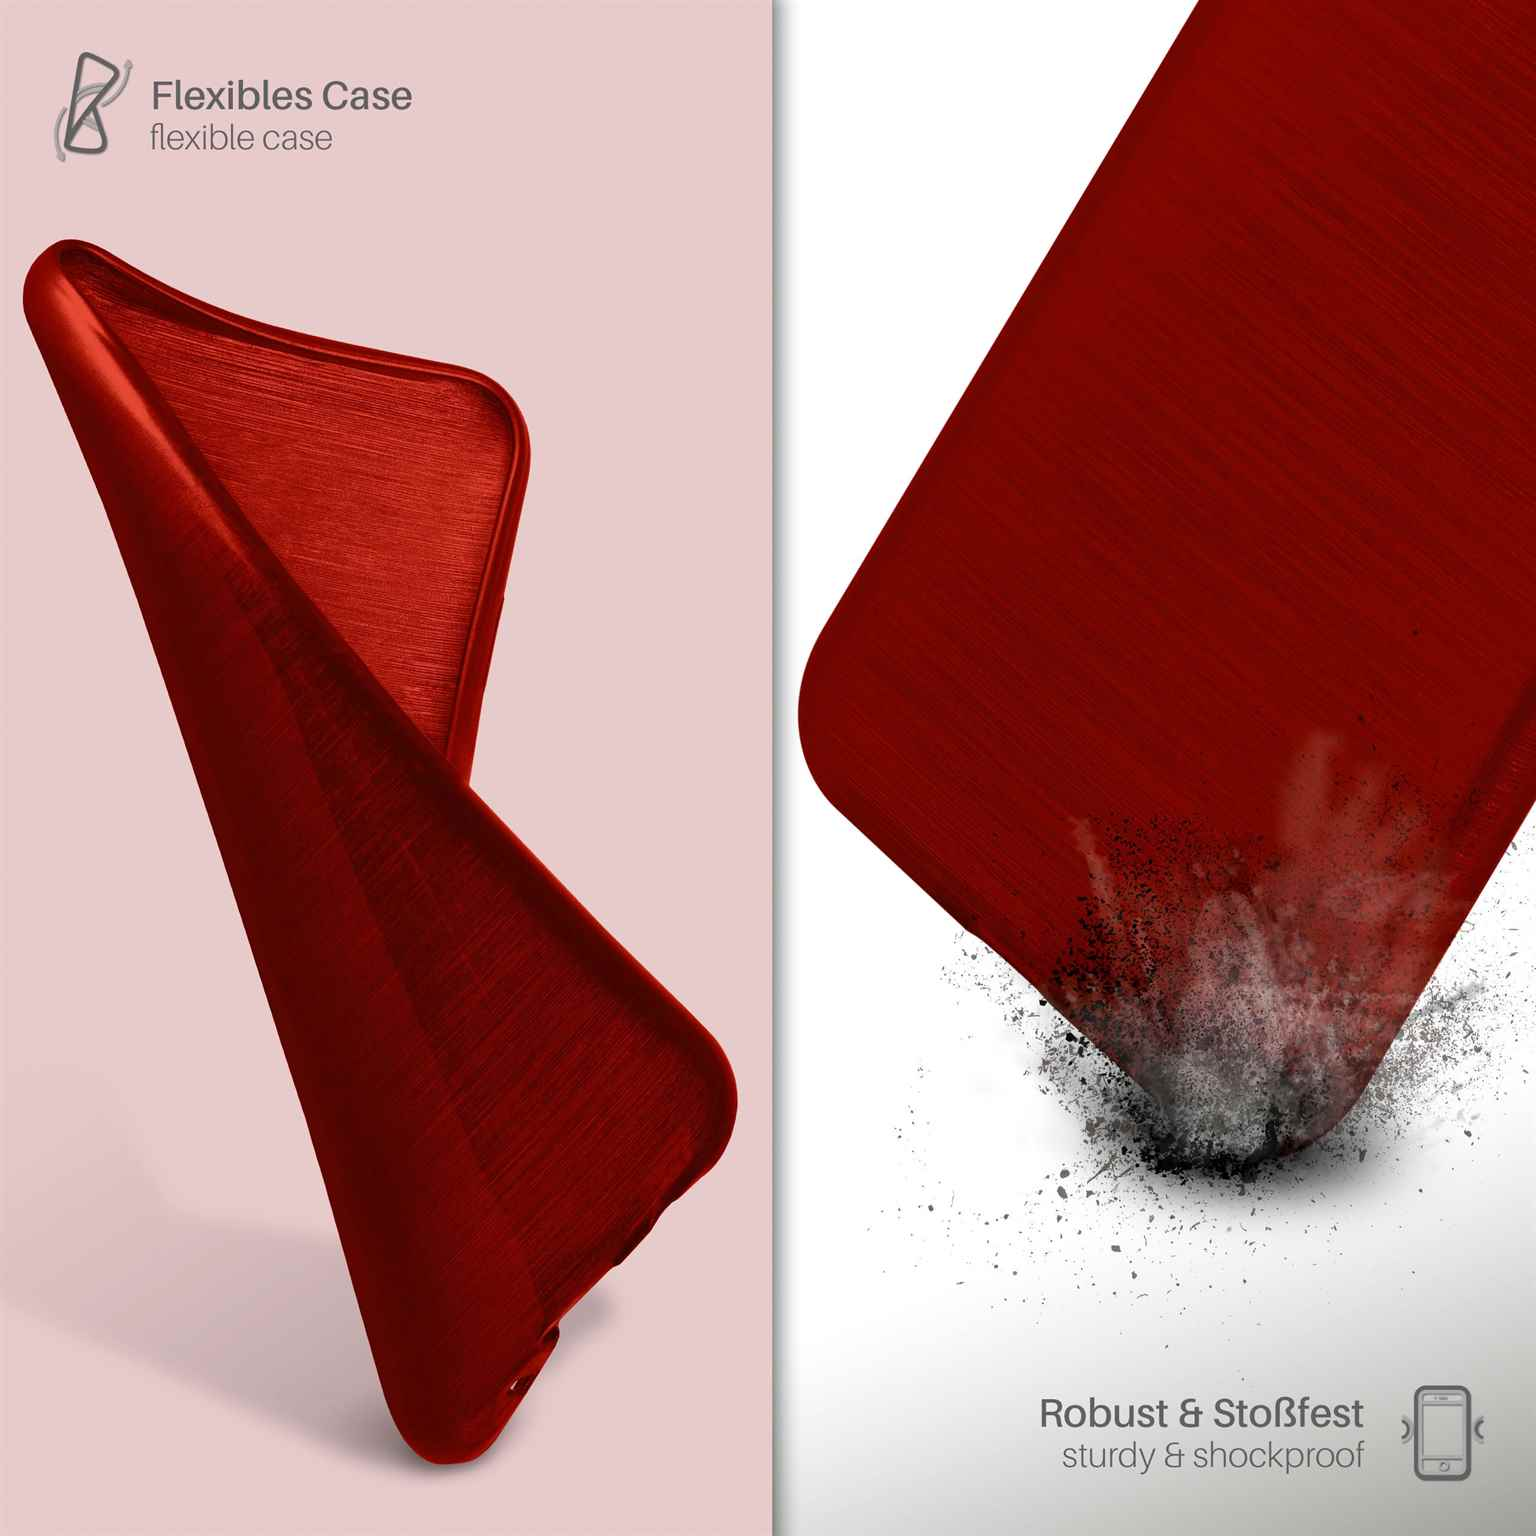 MOEX Brushed Case, Backcover, Apple, 4S, Crimson-Red iPhone